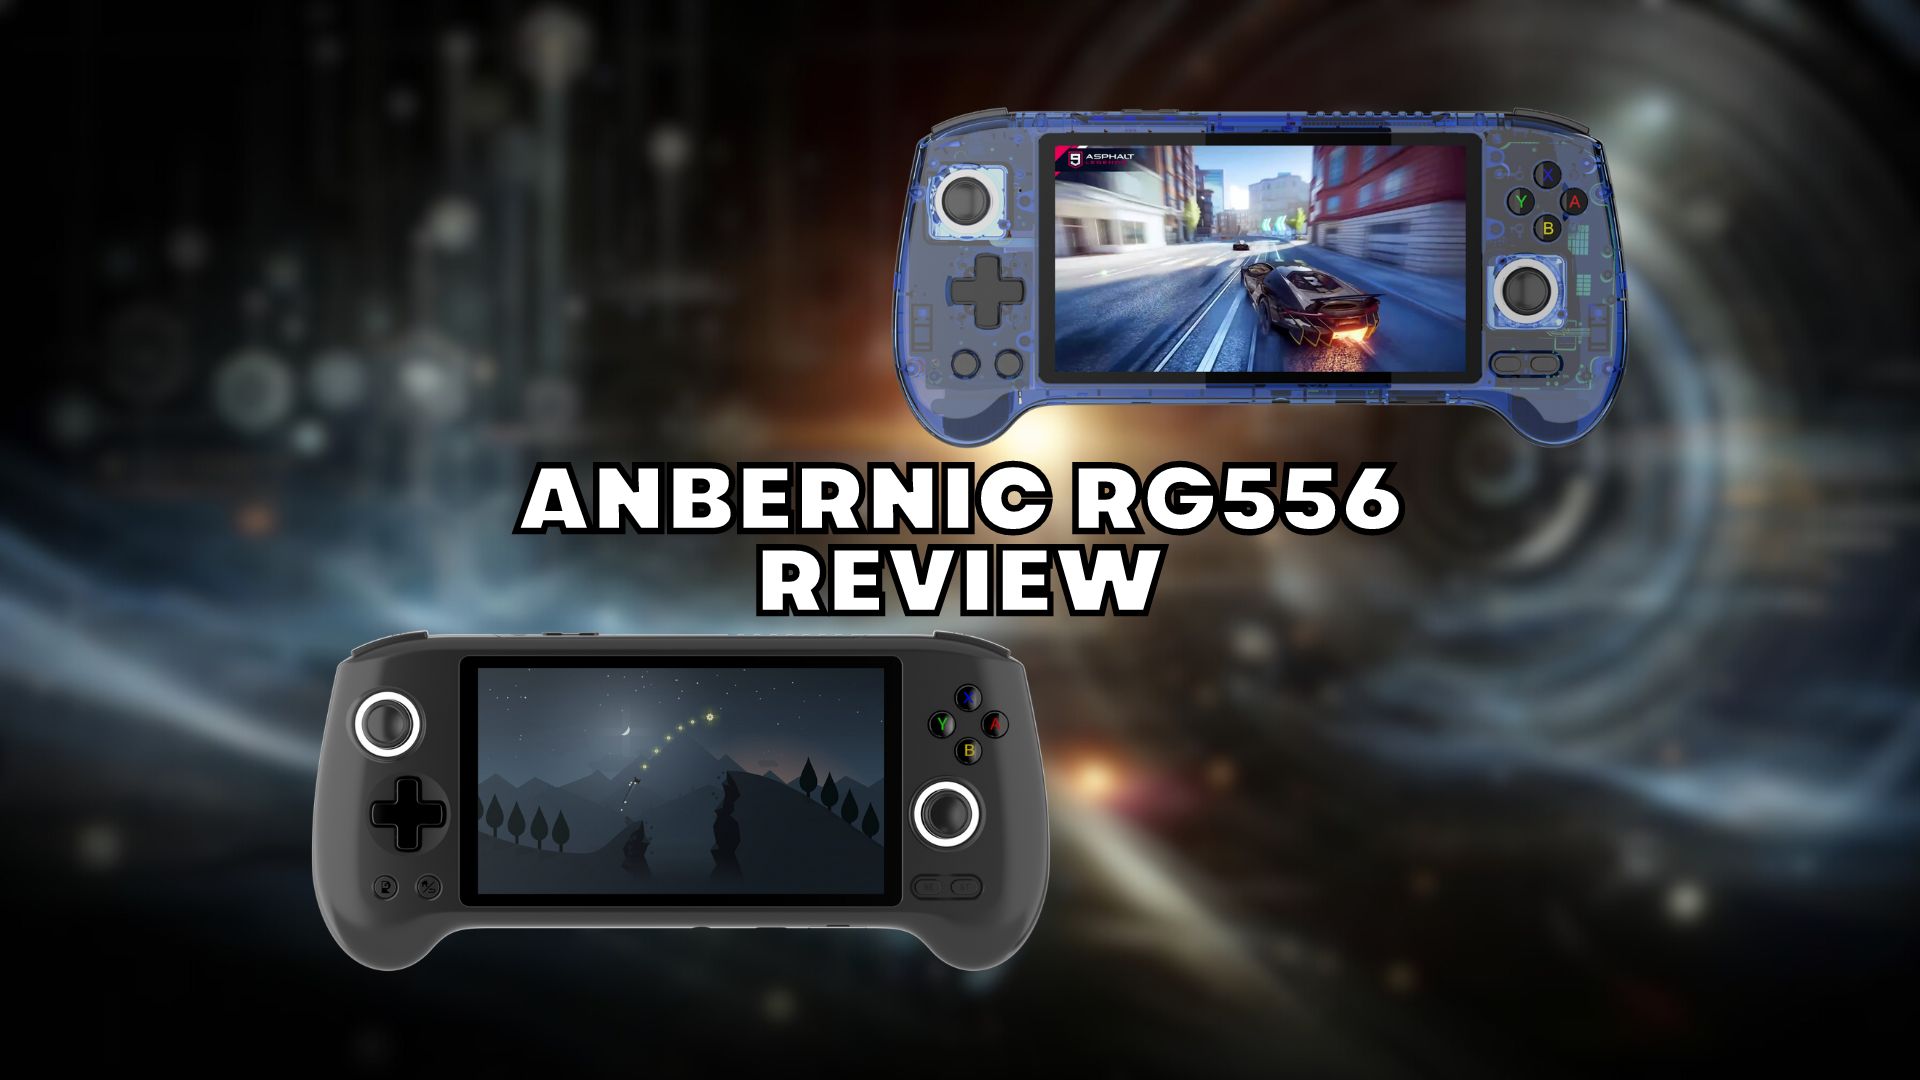 Anbernic RG556 review with video – Android gaming handheld with AMOLED screen